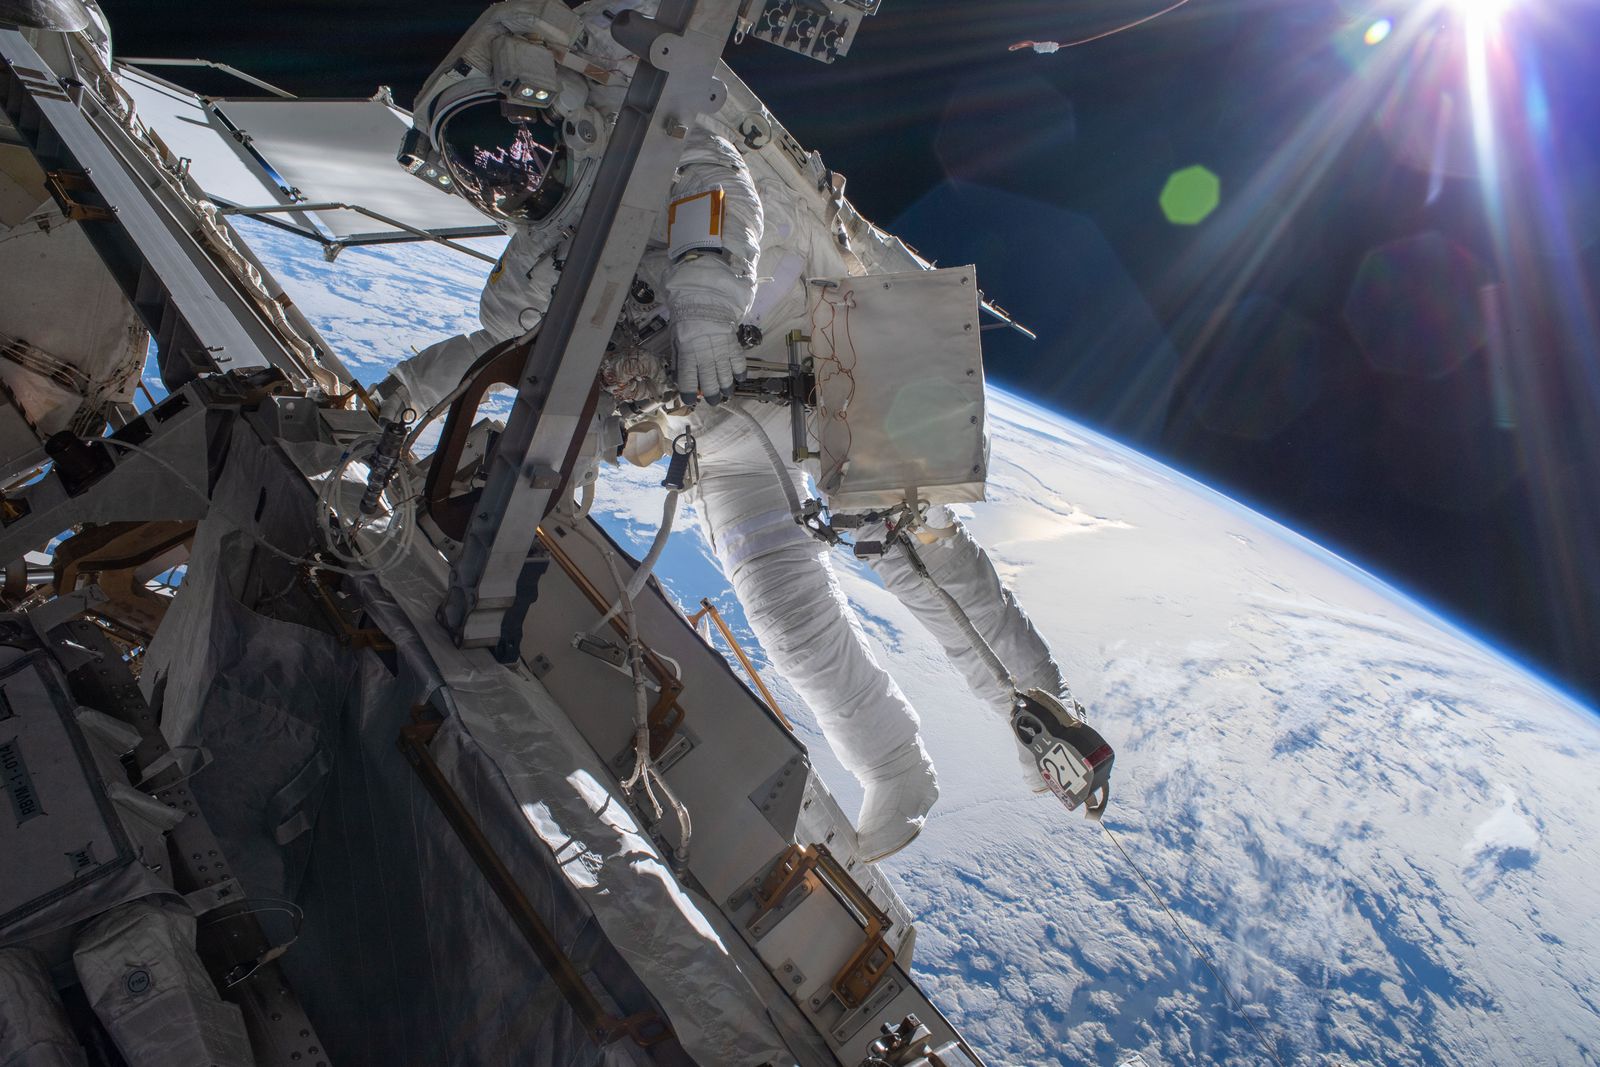 Tom Cruise Might Become the First Civilian to Spacewalk at the ISS